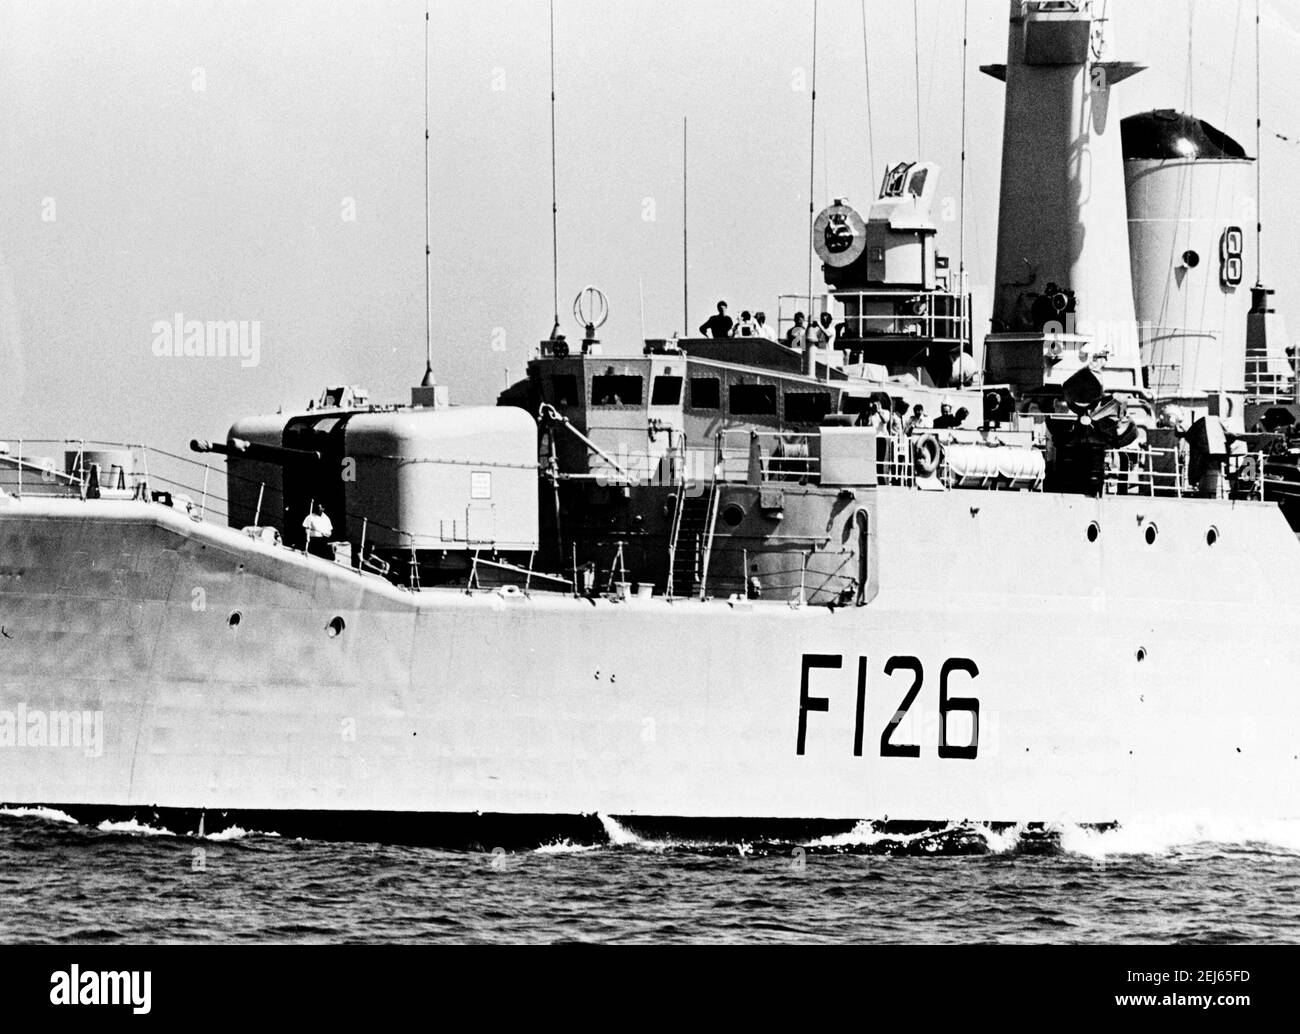 AJAXNETPHOTO. 1975. PORTSMOUTH, ENGLAND - FRIGATE HMS PLYMOUTH AT SEA. ROTHESAY CLASS FRIGATE BUILT AT DEVONPORT DOCKYARD 1959. IN 1982, PLYMOUTH WAS ONE OF FIRST BRITISH WARSHIPS TO ARRIVE IN SOUTH ATLANTIC DURING THE FALKLANDS ISLANDS CONFLICT, TAKING PART IN RECAPTURE OF SOUTH GEORGIA DURING OPERATION PARAQUET.  PHOTO:JONATHAN EASTLAND/AJAX REF:1975 NA F126 Stock Photo